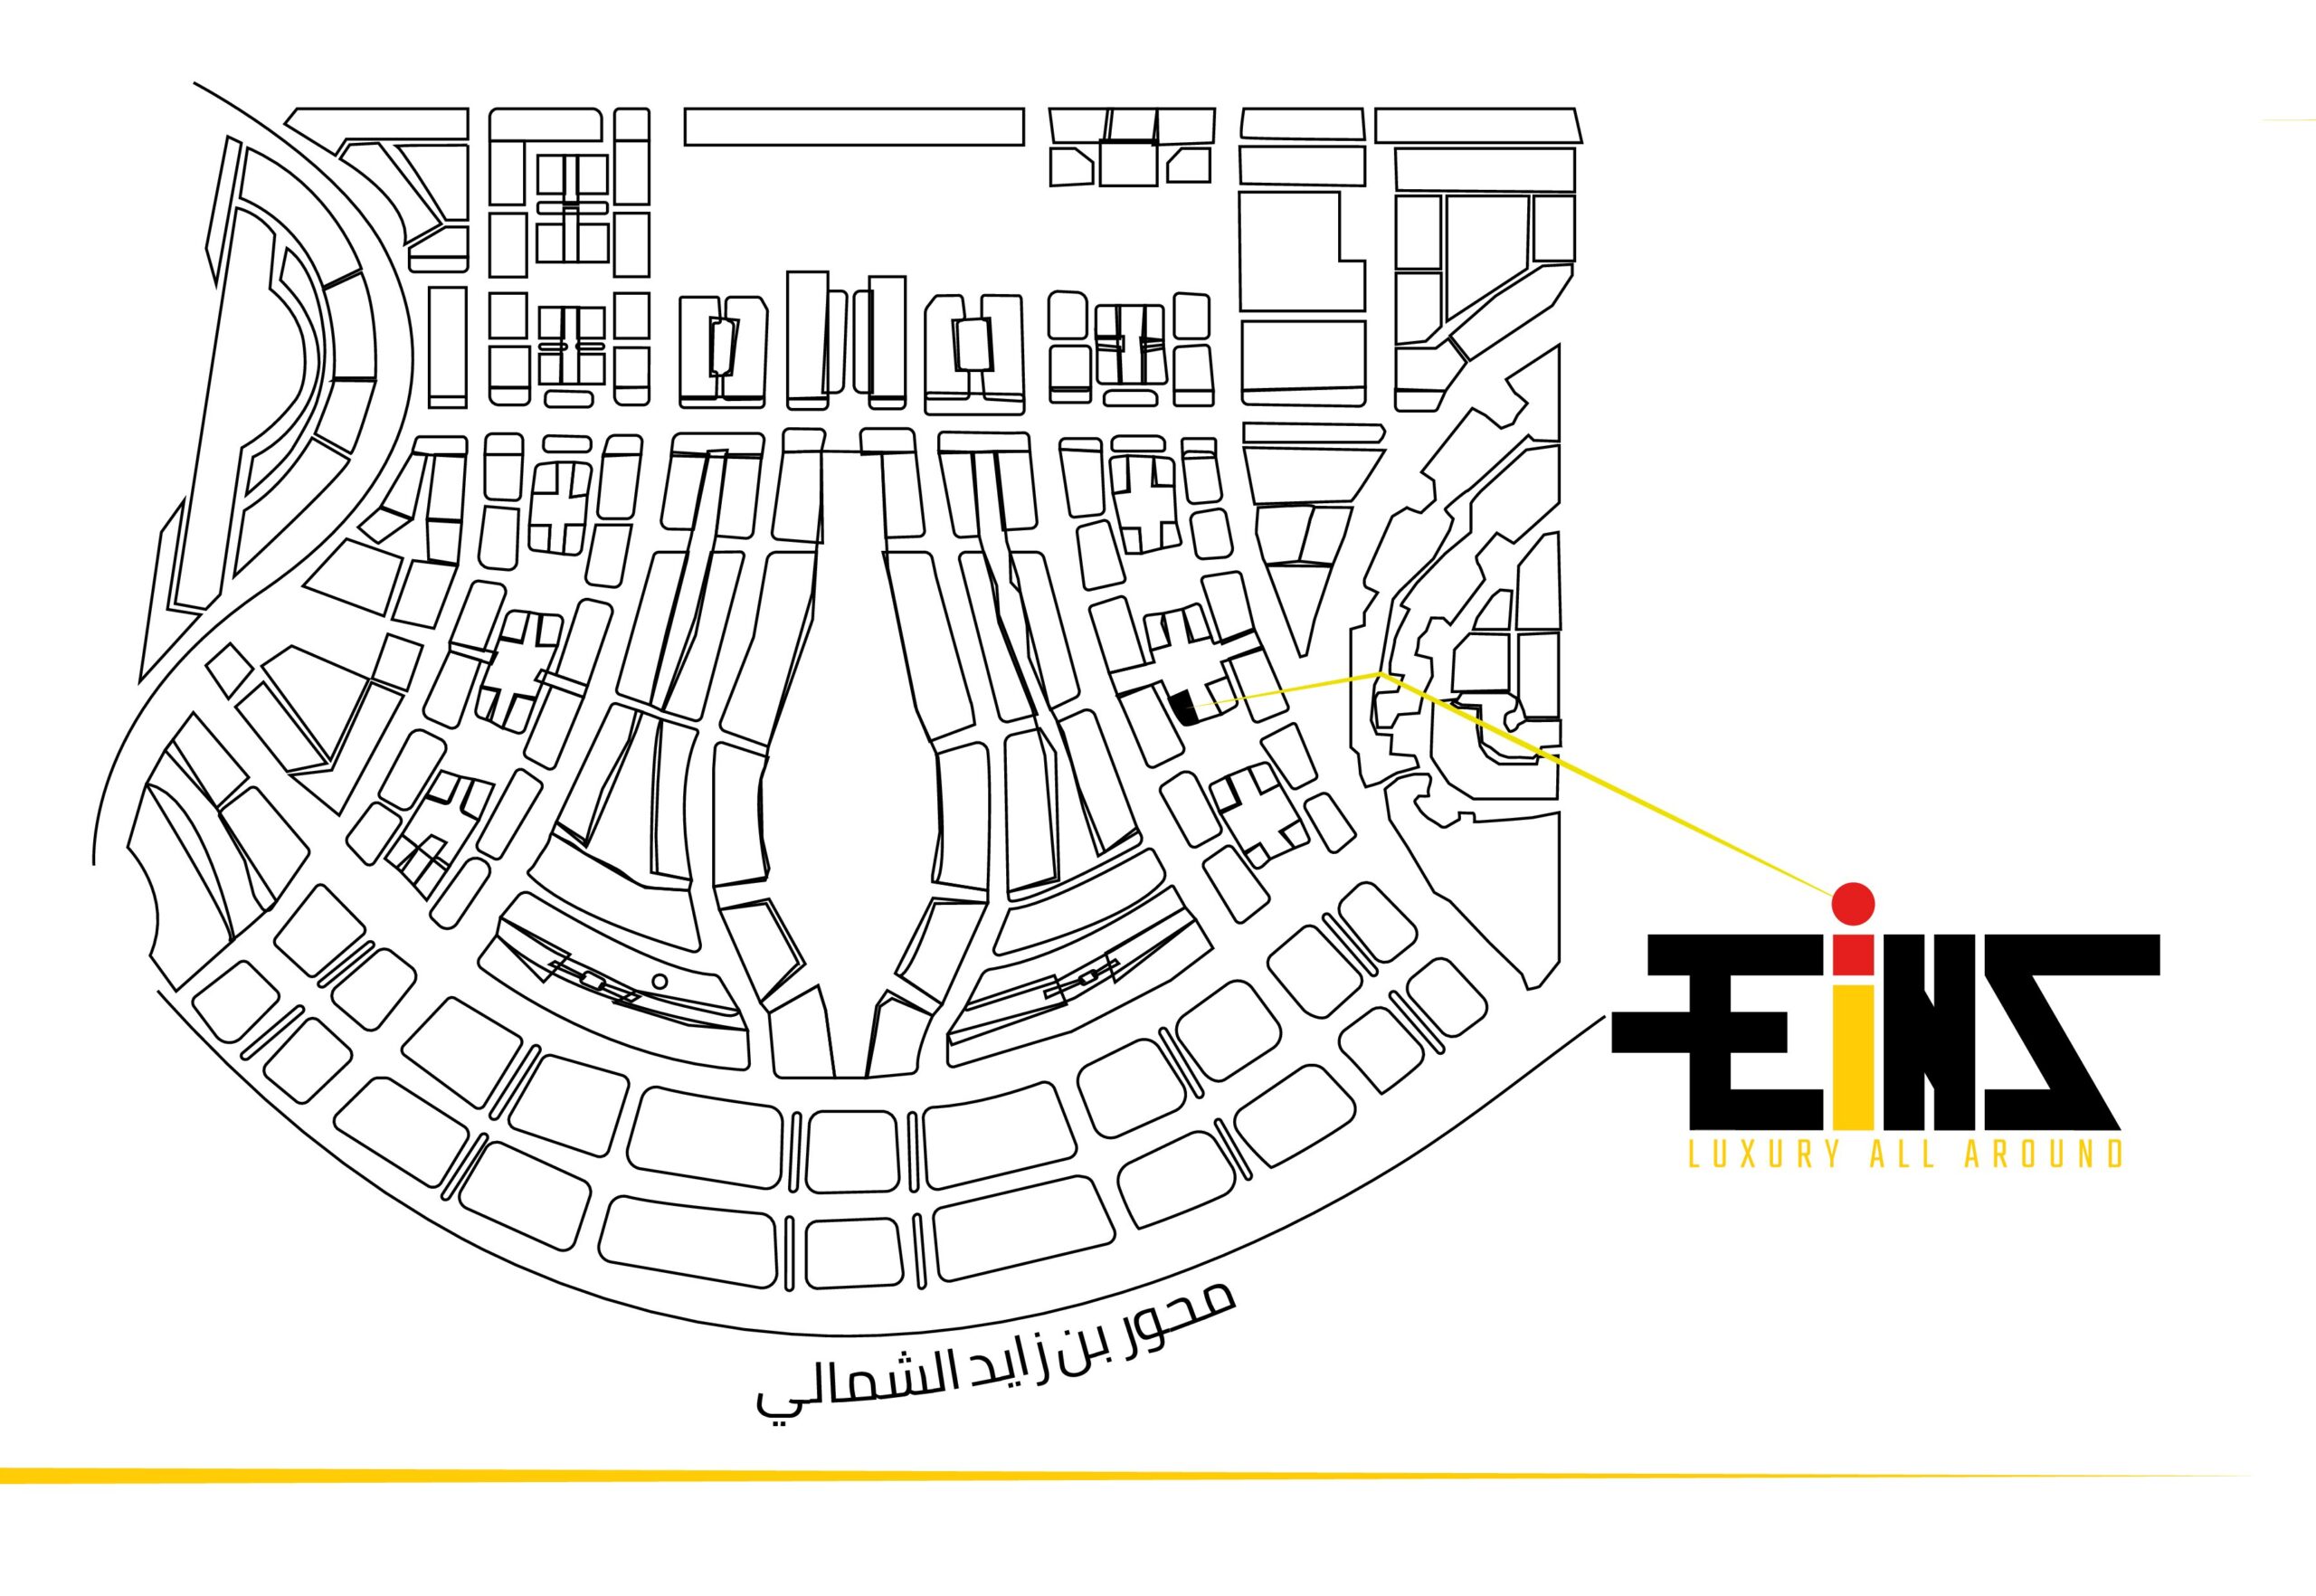 Hurry up to book a shop with an area starting from 55 meters in Eins tower